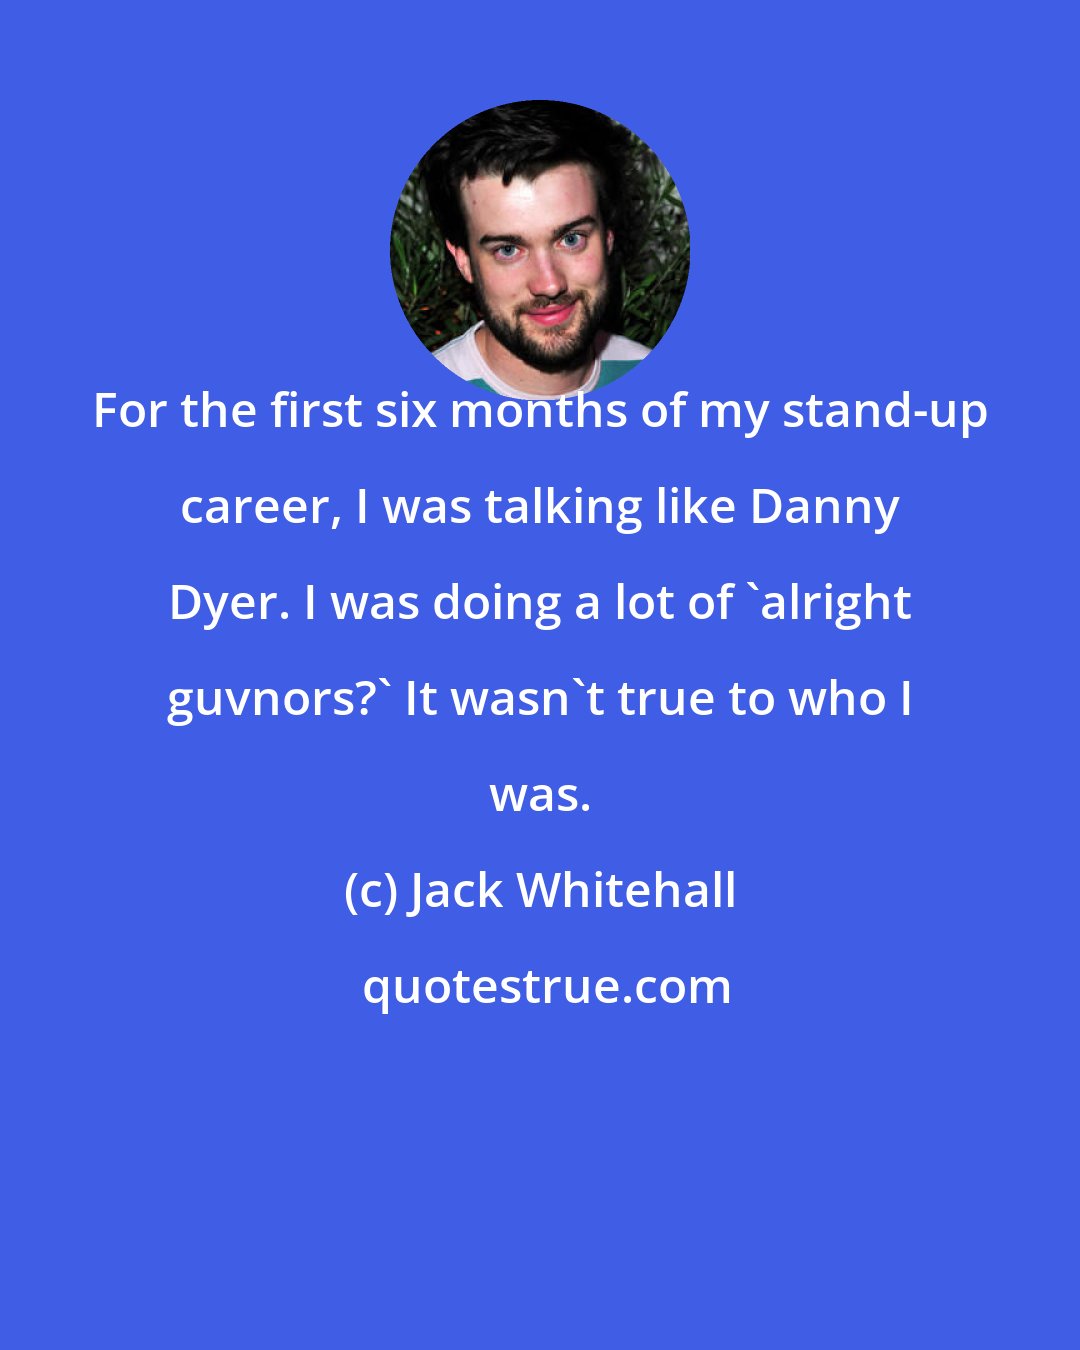 Jack Whitehall: For the first six months of my stand-up career, I was talking like Danny Dyer. I was doing a lot of 'alright guvnors?' It wasn't true to who I was.